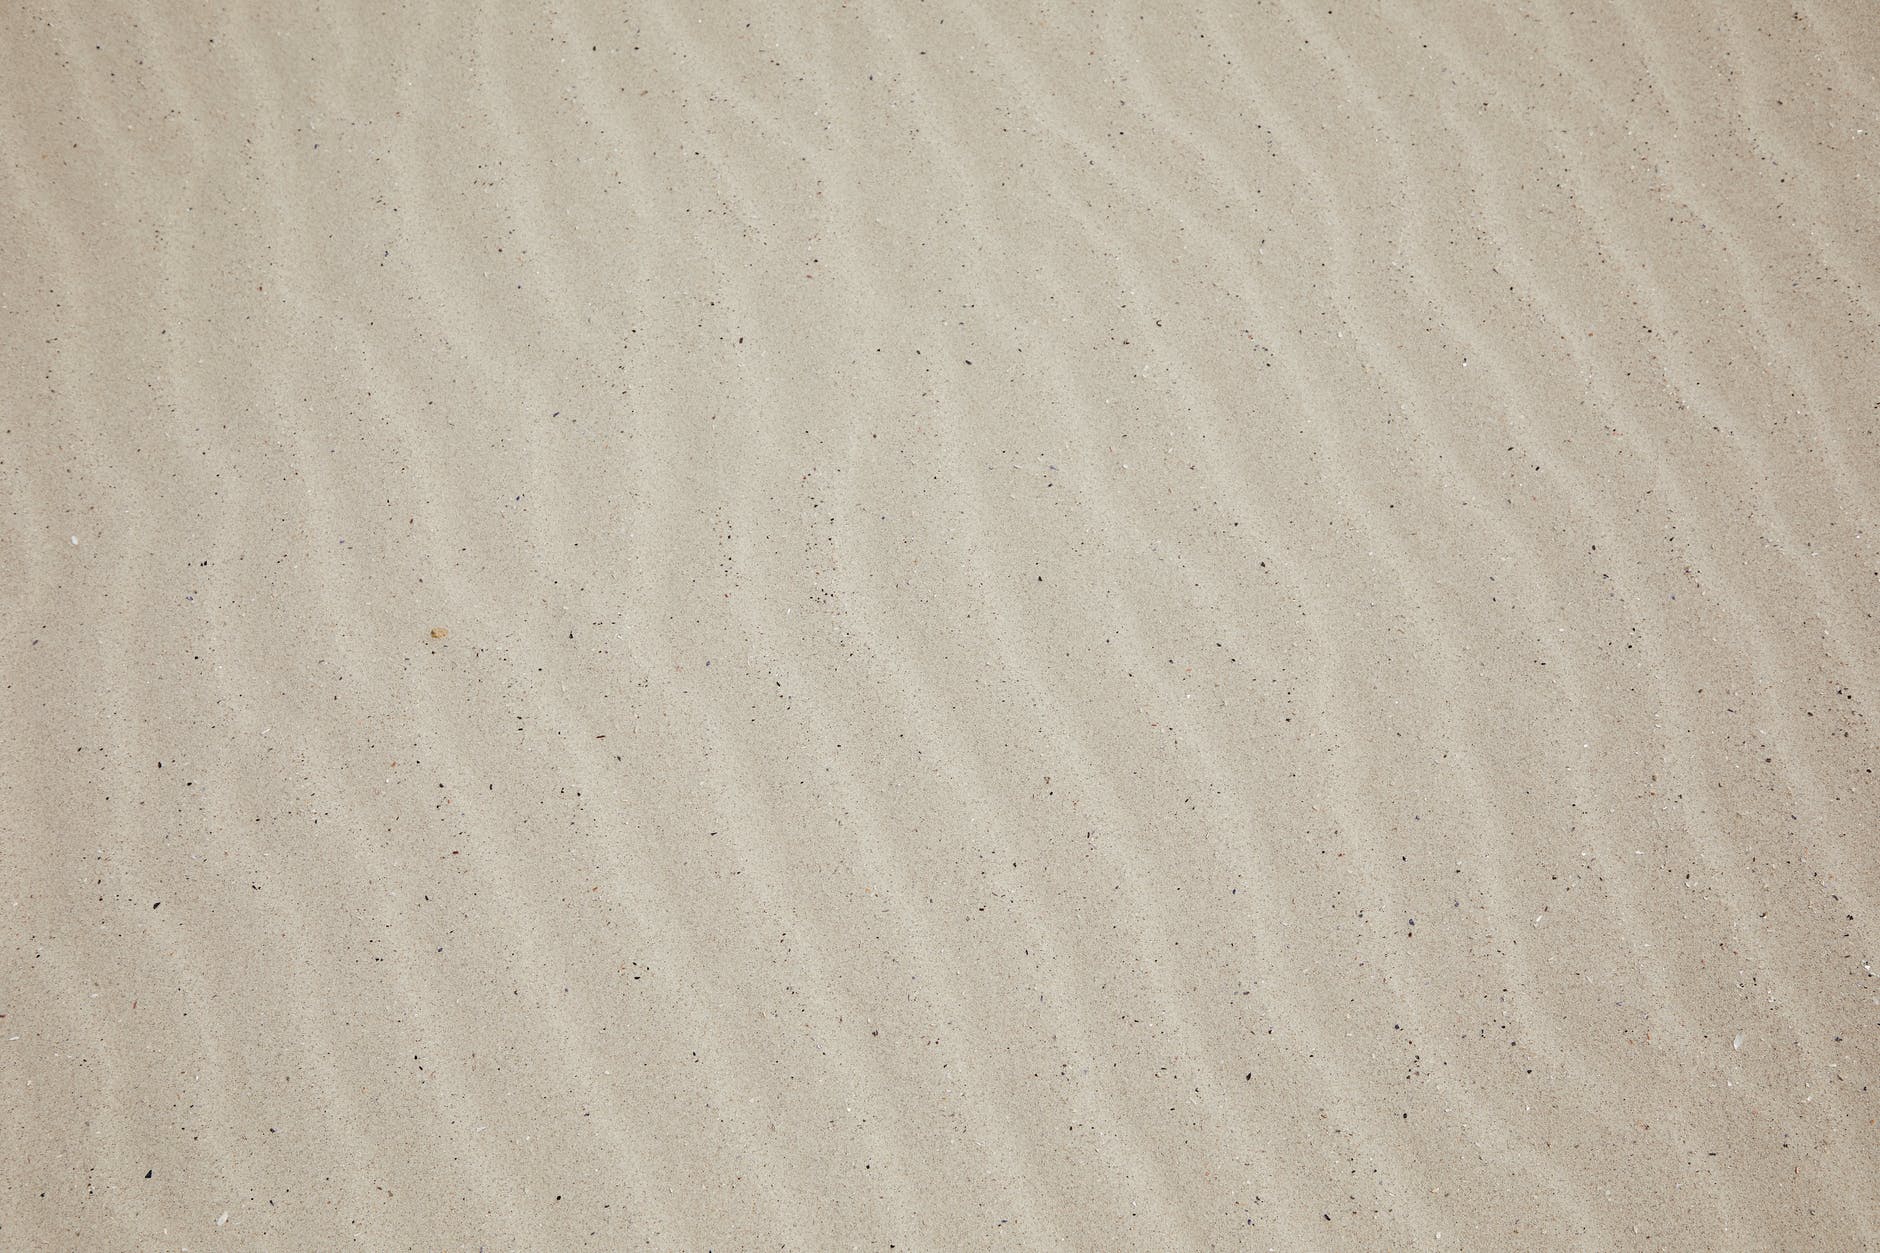 sandy surface of beach in daytime